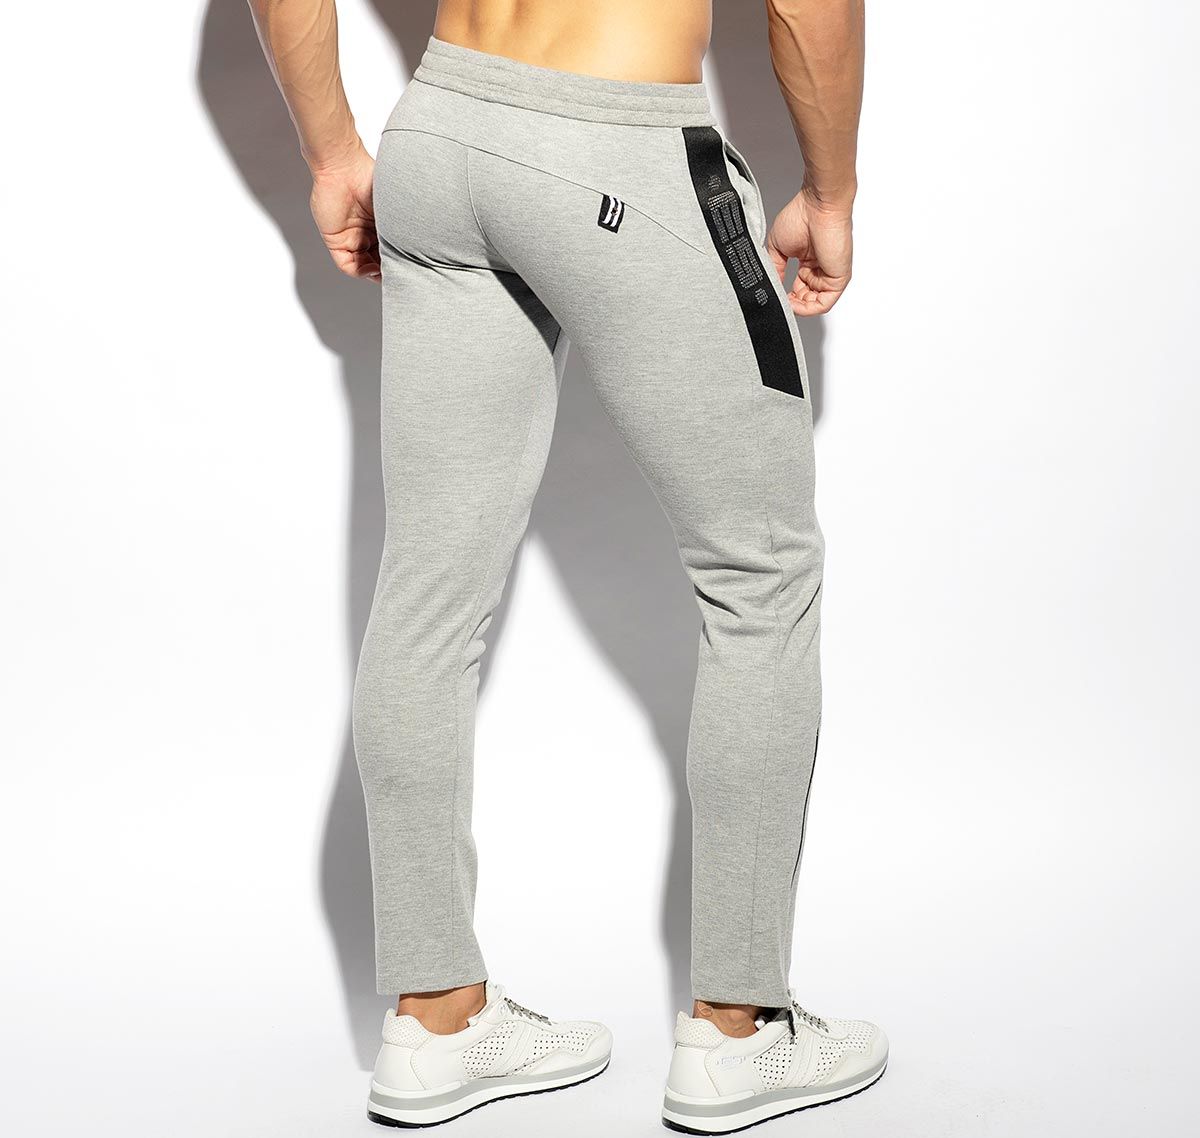 ES Collection Pantaloni sportivi lunghi FIRST CLASS ATHLETIC PANTS SP294, grigio